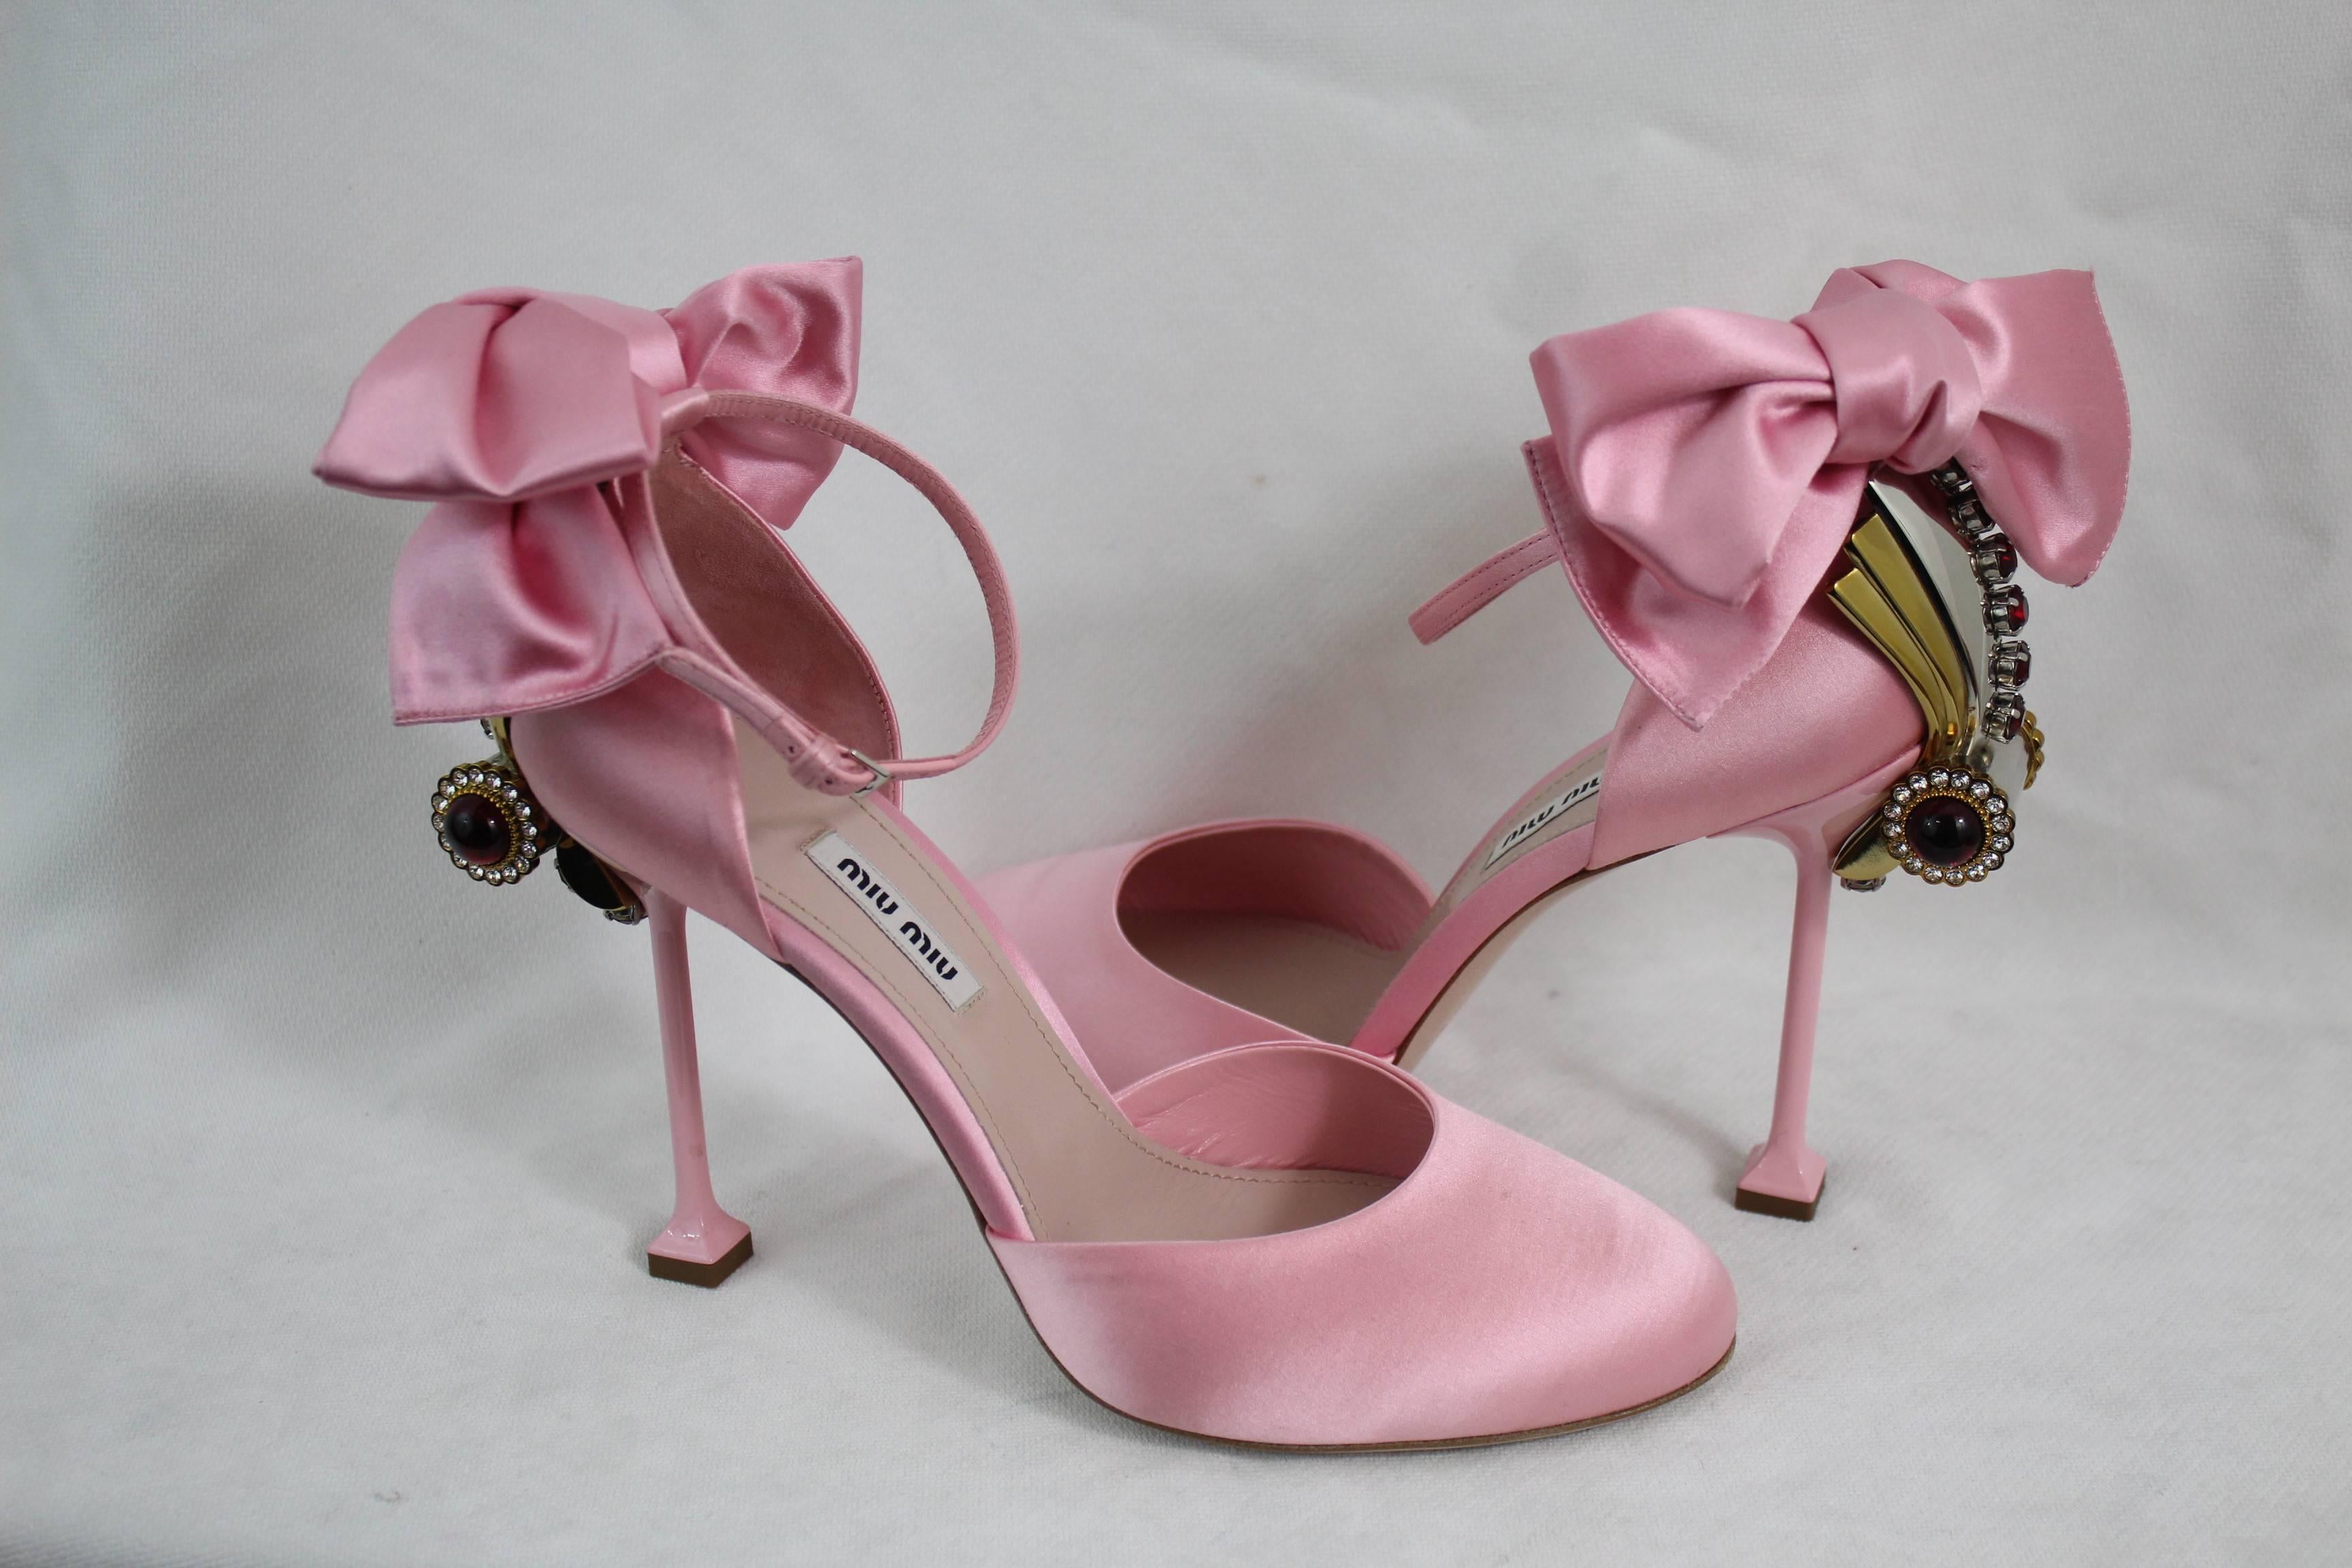 Sold out Miu miu pink satin pumps with impresive jewlery heel.

new never worn with box.

Size Fr 440